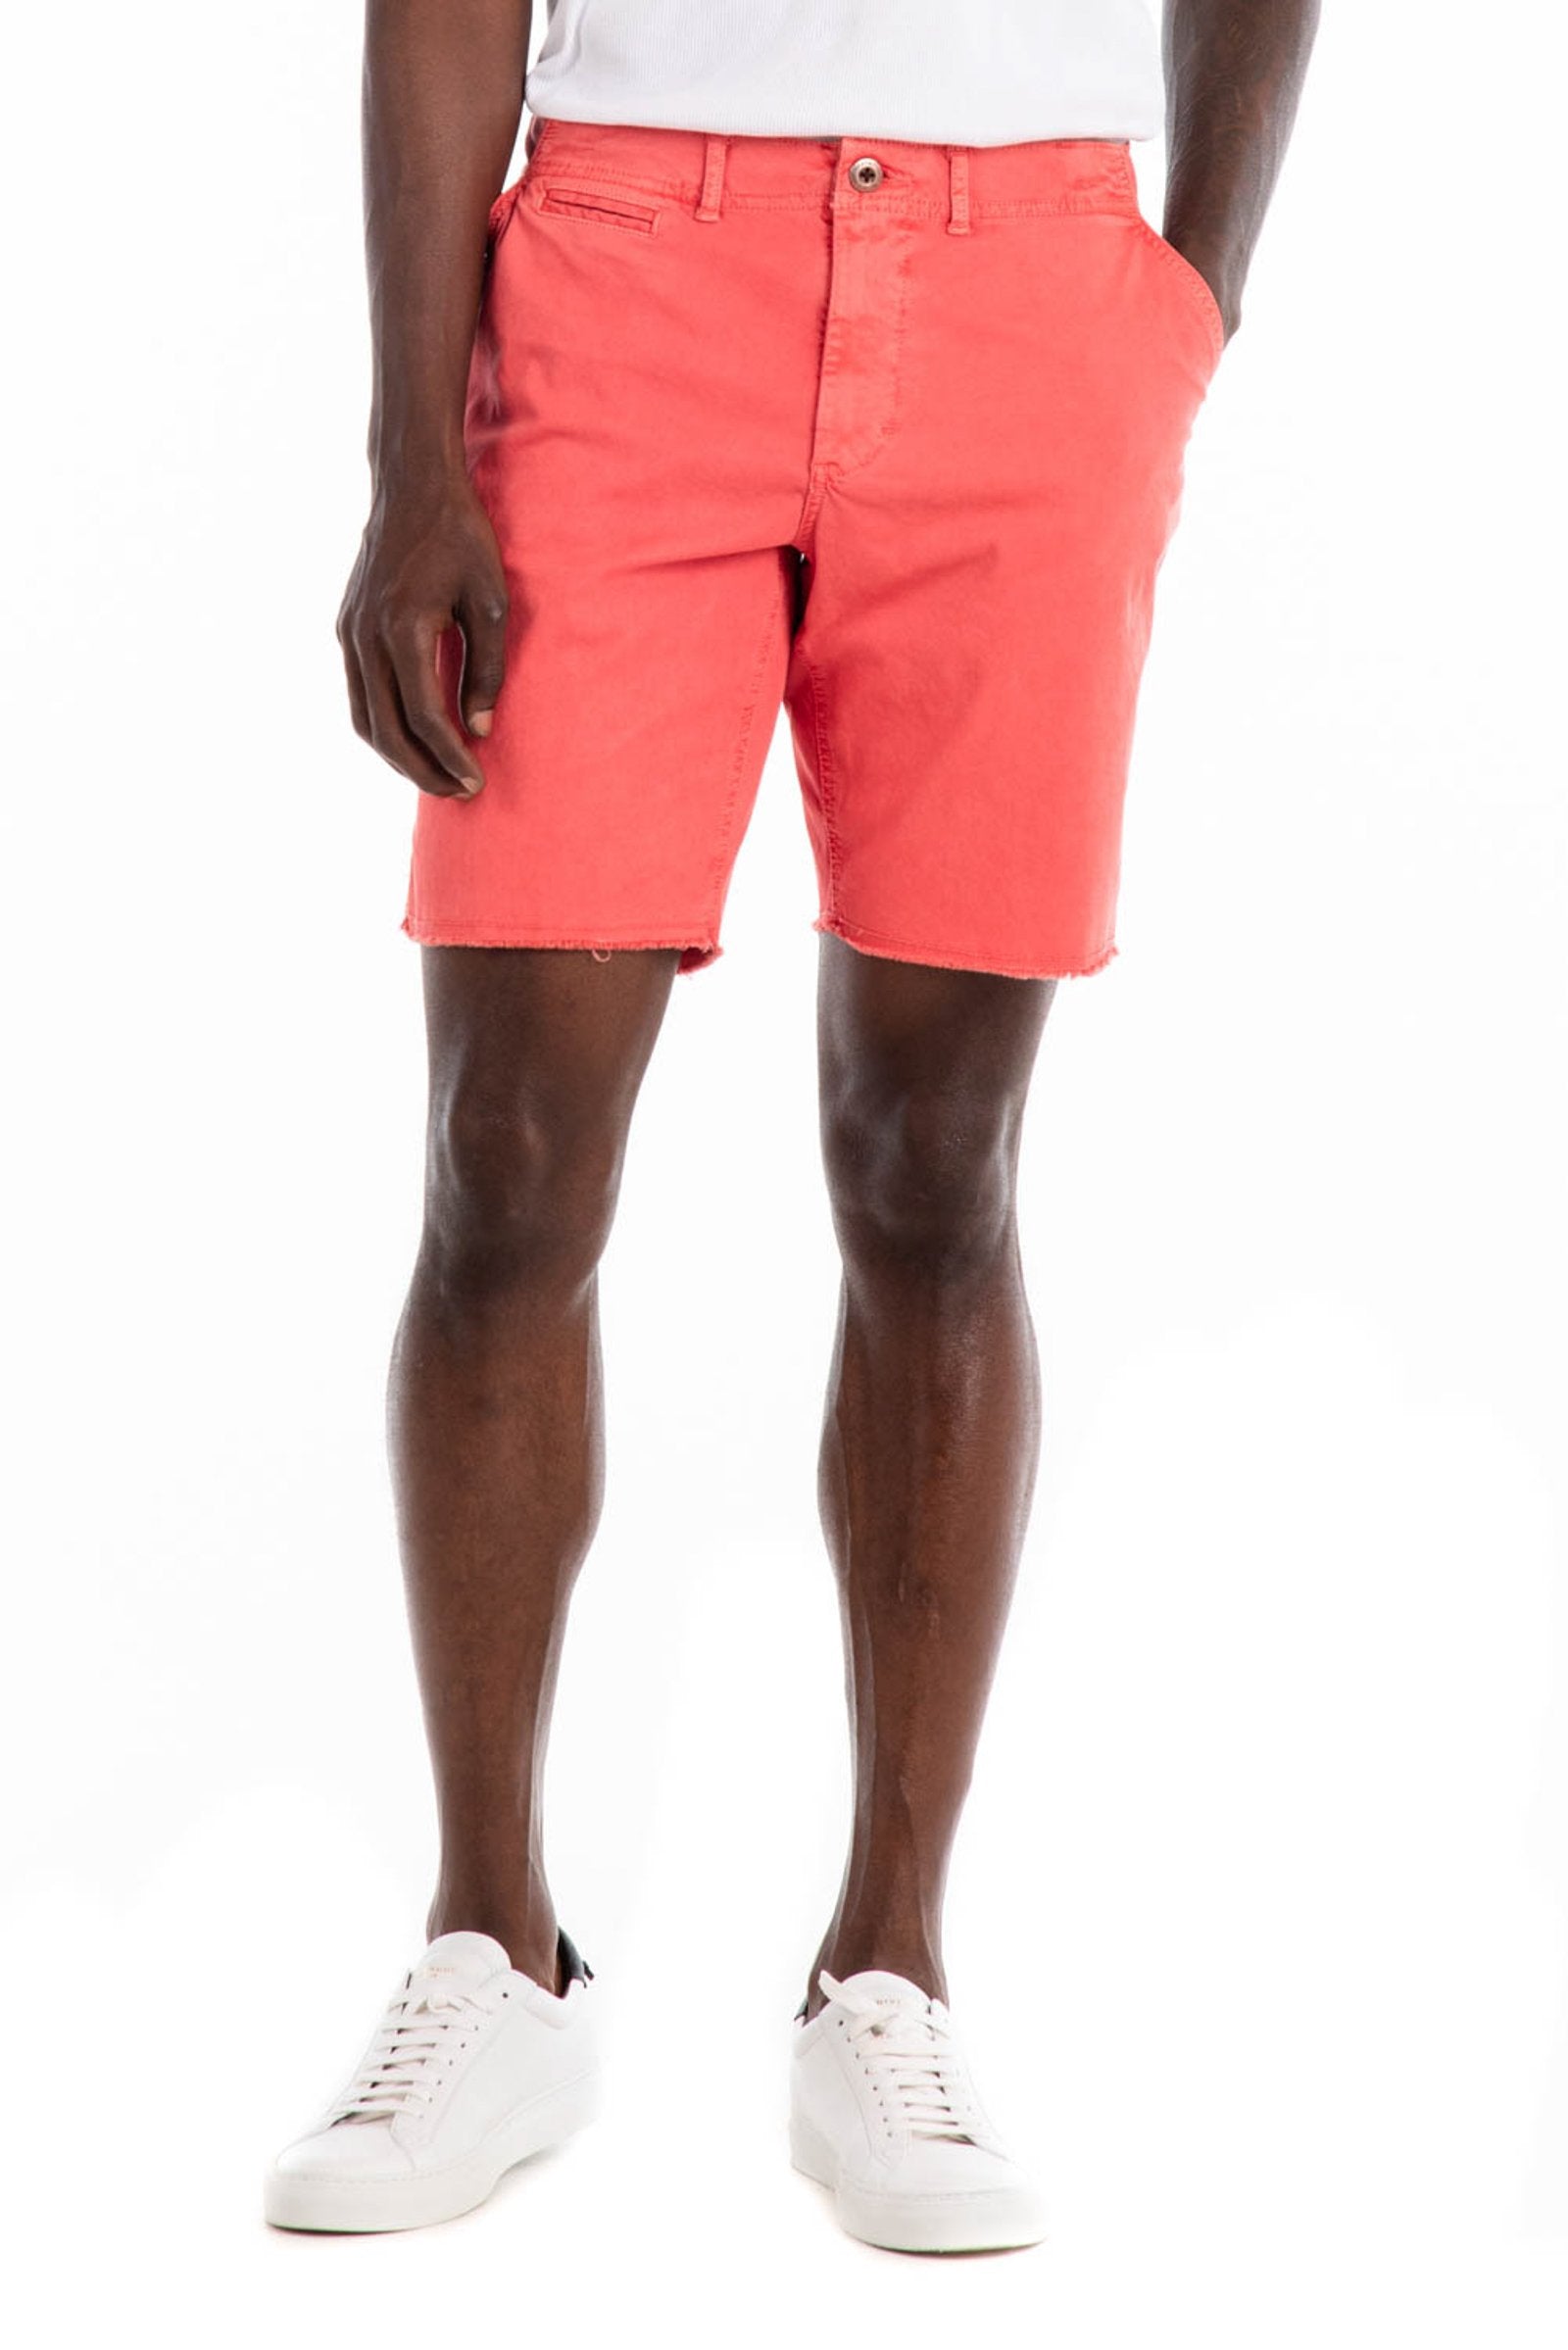 Original Paperbacks Brentwood Chino Short in Persimmon on Model Cropped Styled View